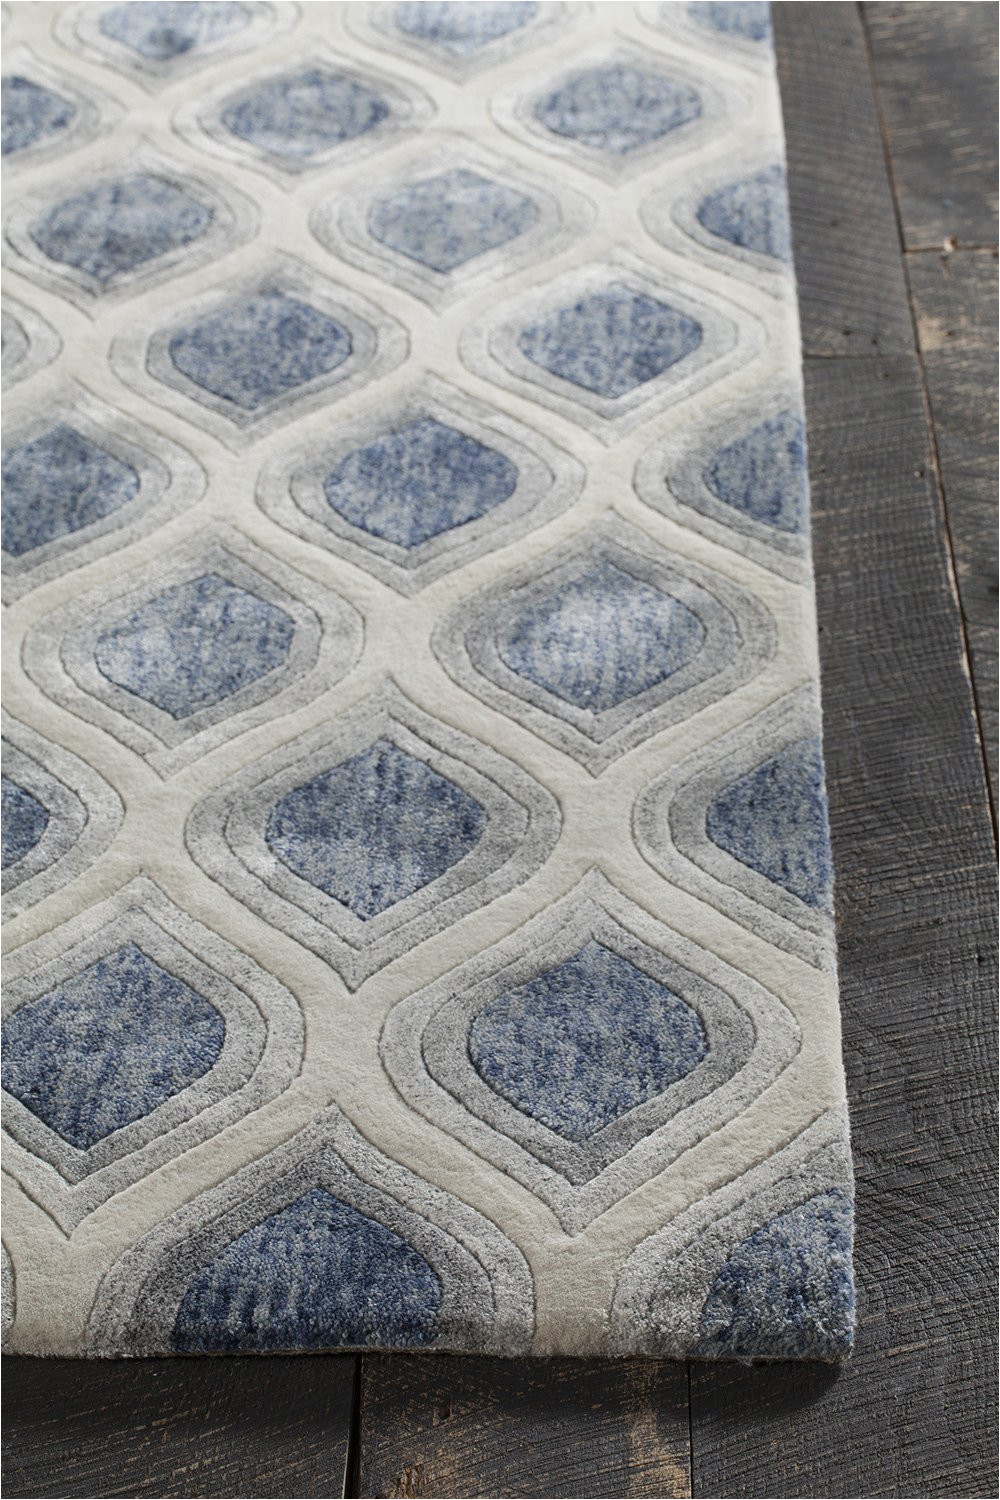 White Rug with Blue Pattern Clara Collection Hand Tufted area Rug In Blue Grey White